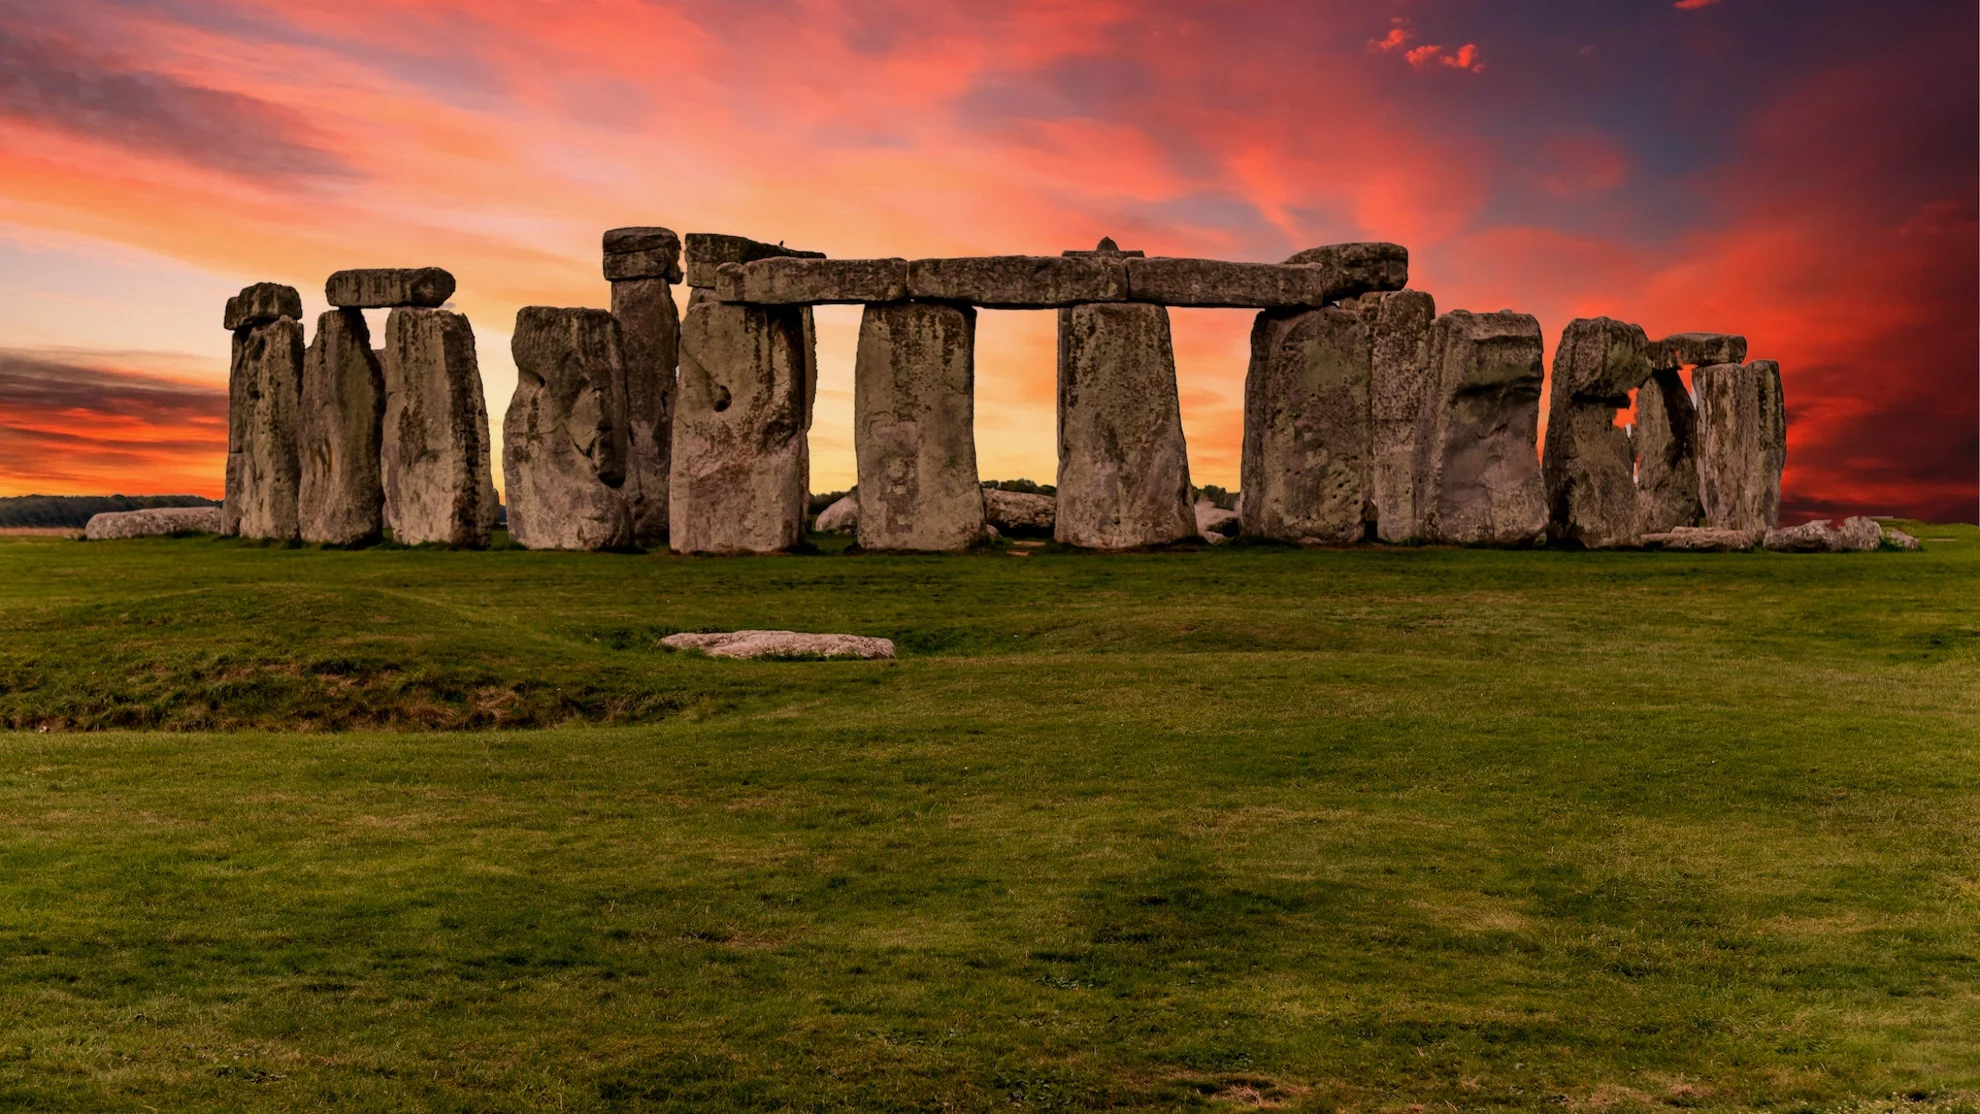 The longest day of the year is here, and it's the earliest in over 200 years! See why the Summer Solstice is so special, here